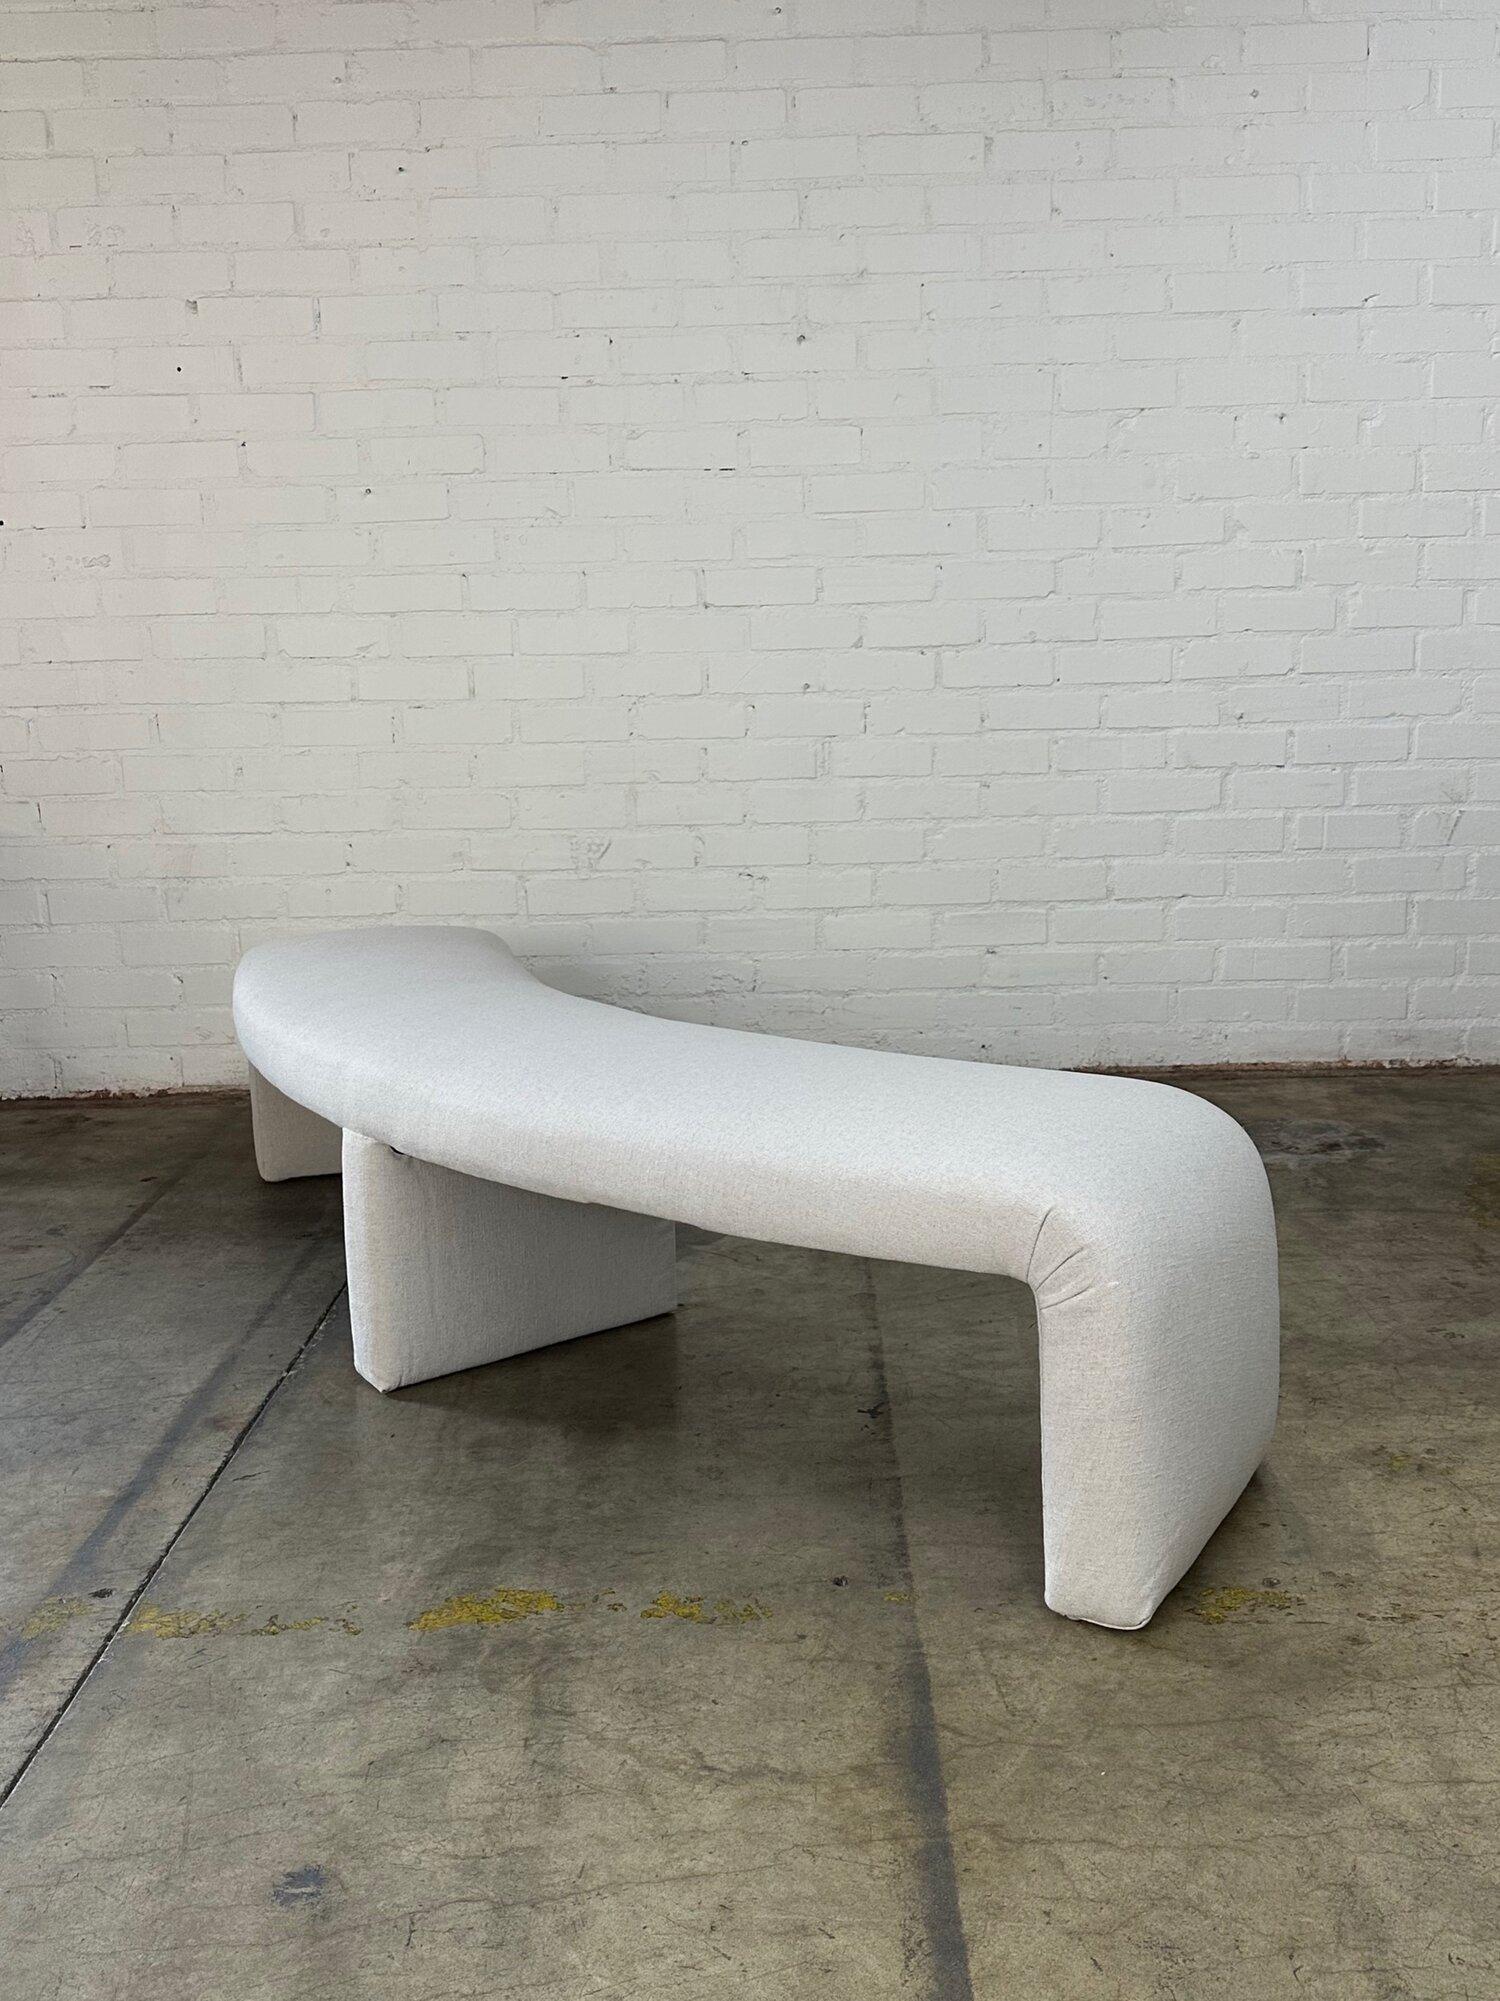 W83 D29 H20 SW80

Handcrafted Curved Waterfall Bench in an off white linen blend.

This color  is now available on the showroom floor.

This item is also available as Made To Order. 